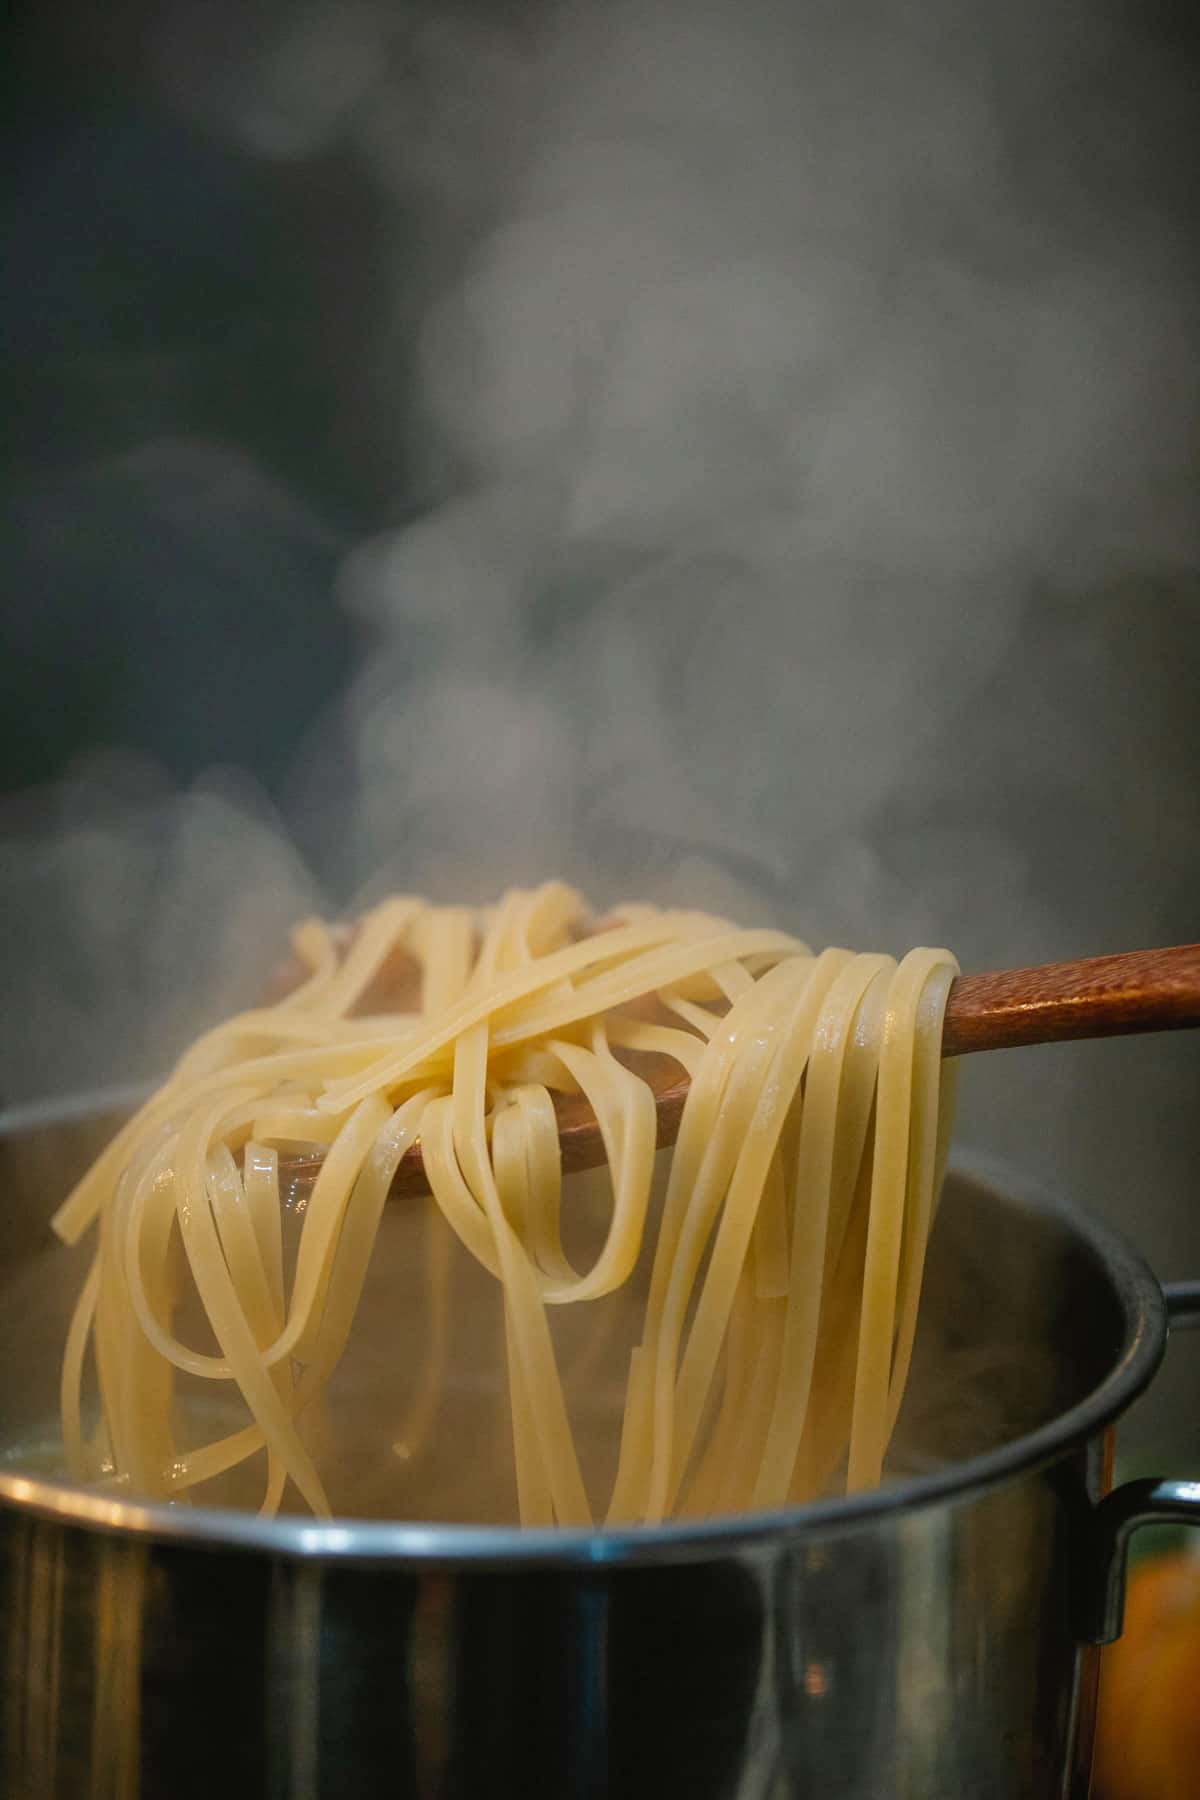 Fettuccine being lifted out of a large pot of boiling water.